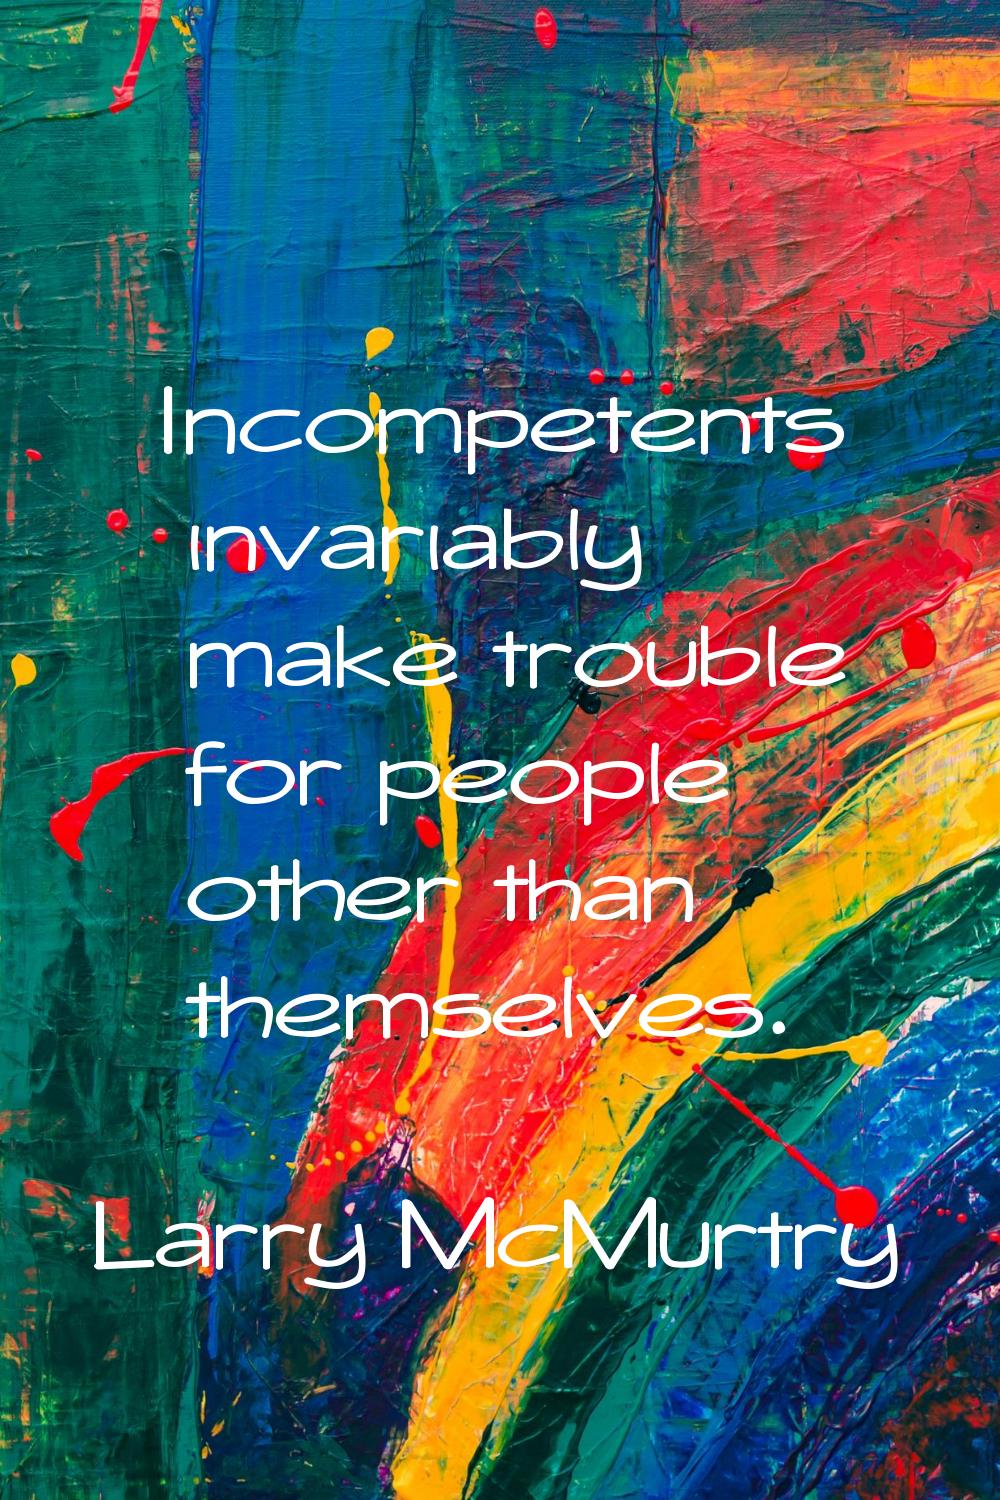 Incompetents invariably make trouble for people other than themselves.